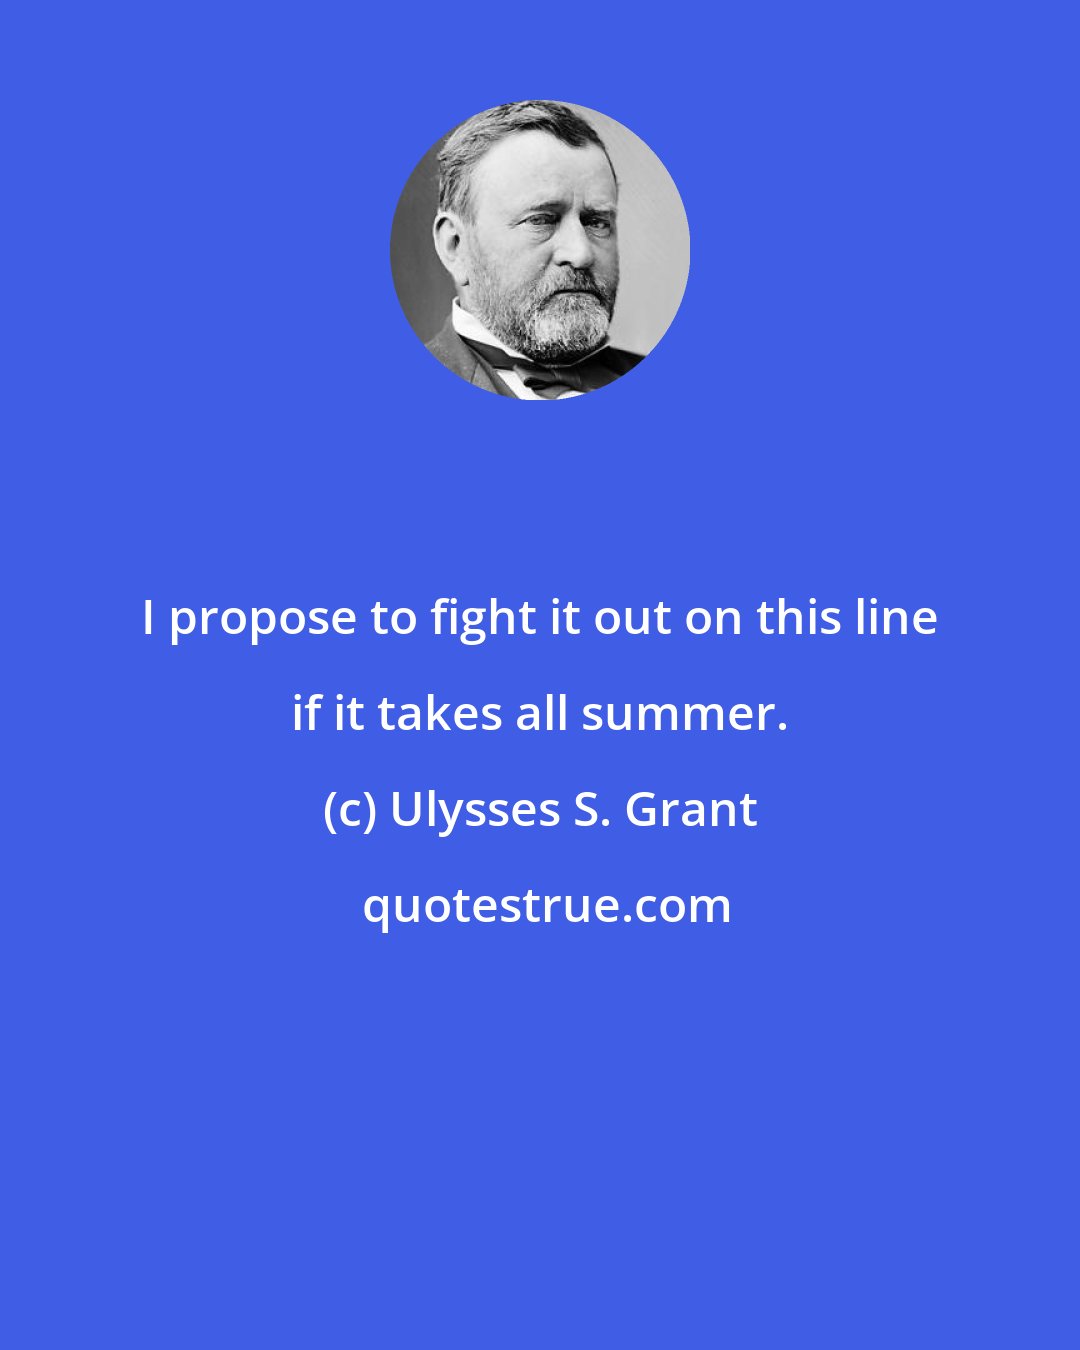 Ulysses S. Grant: I propose to fight it out on this line if it takes all summer.